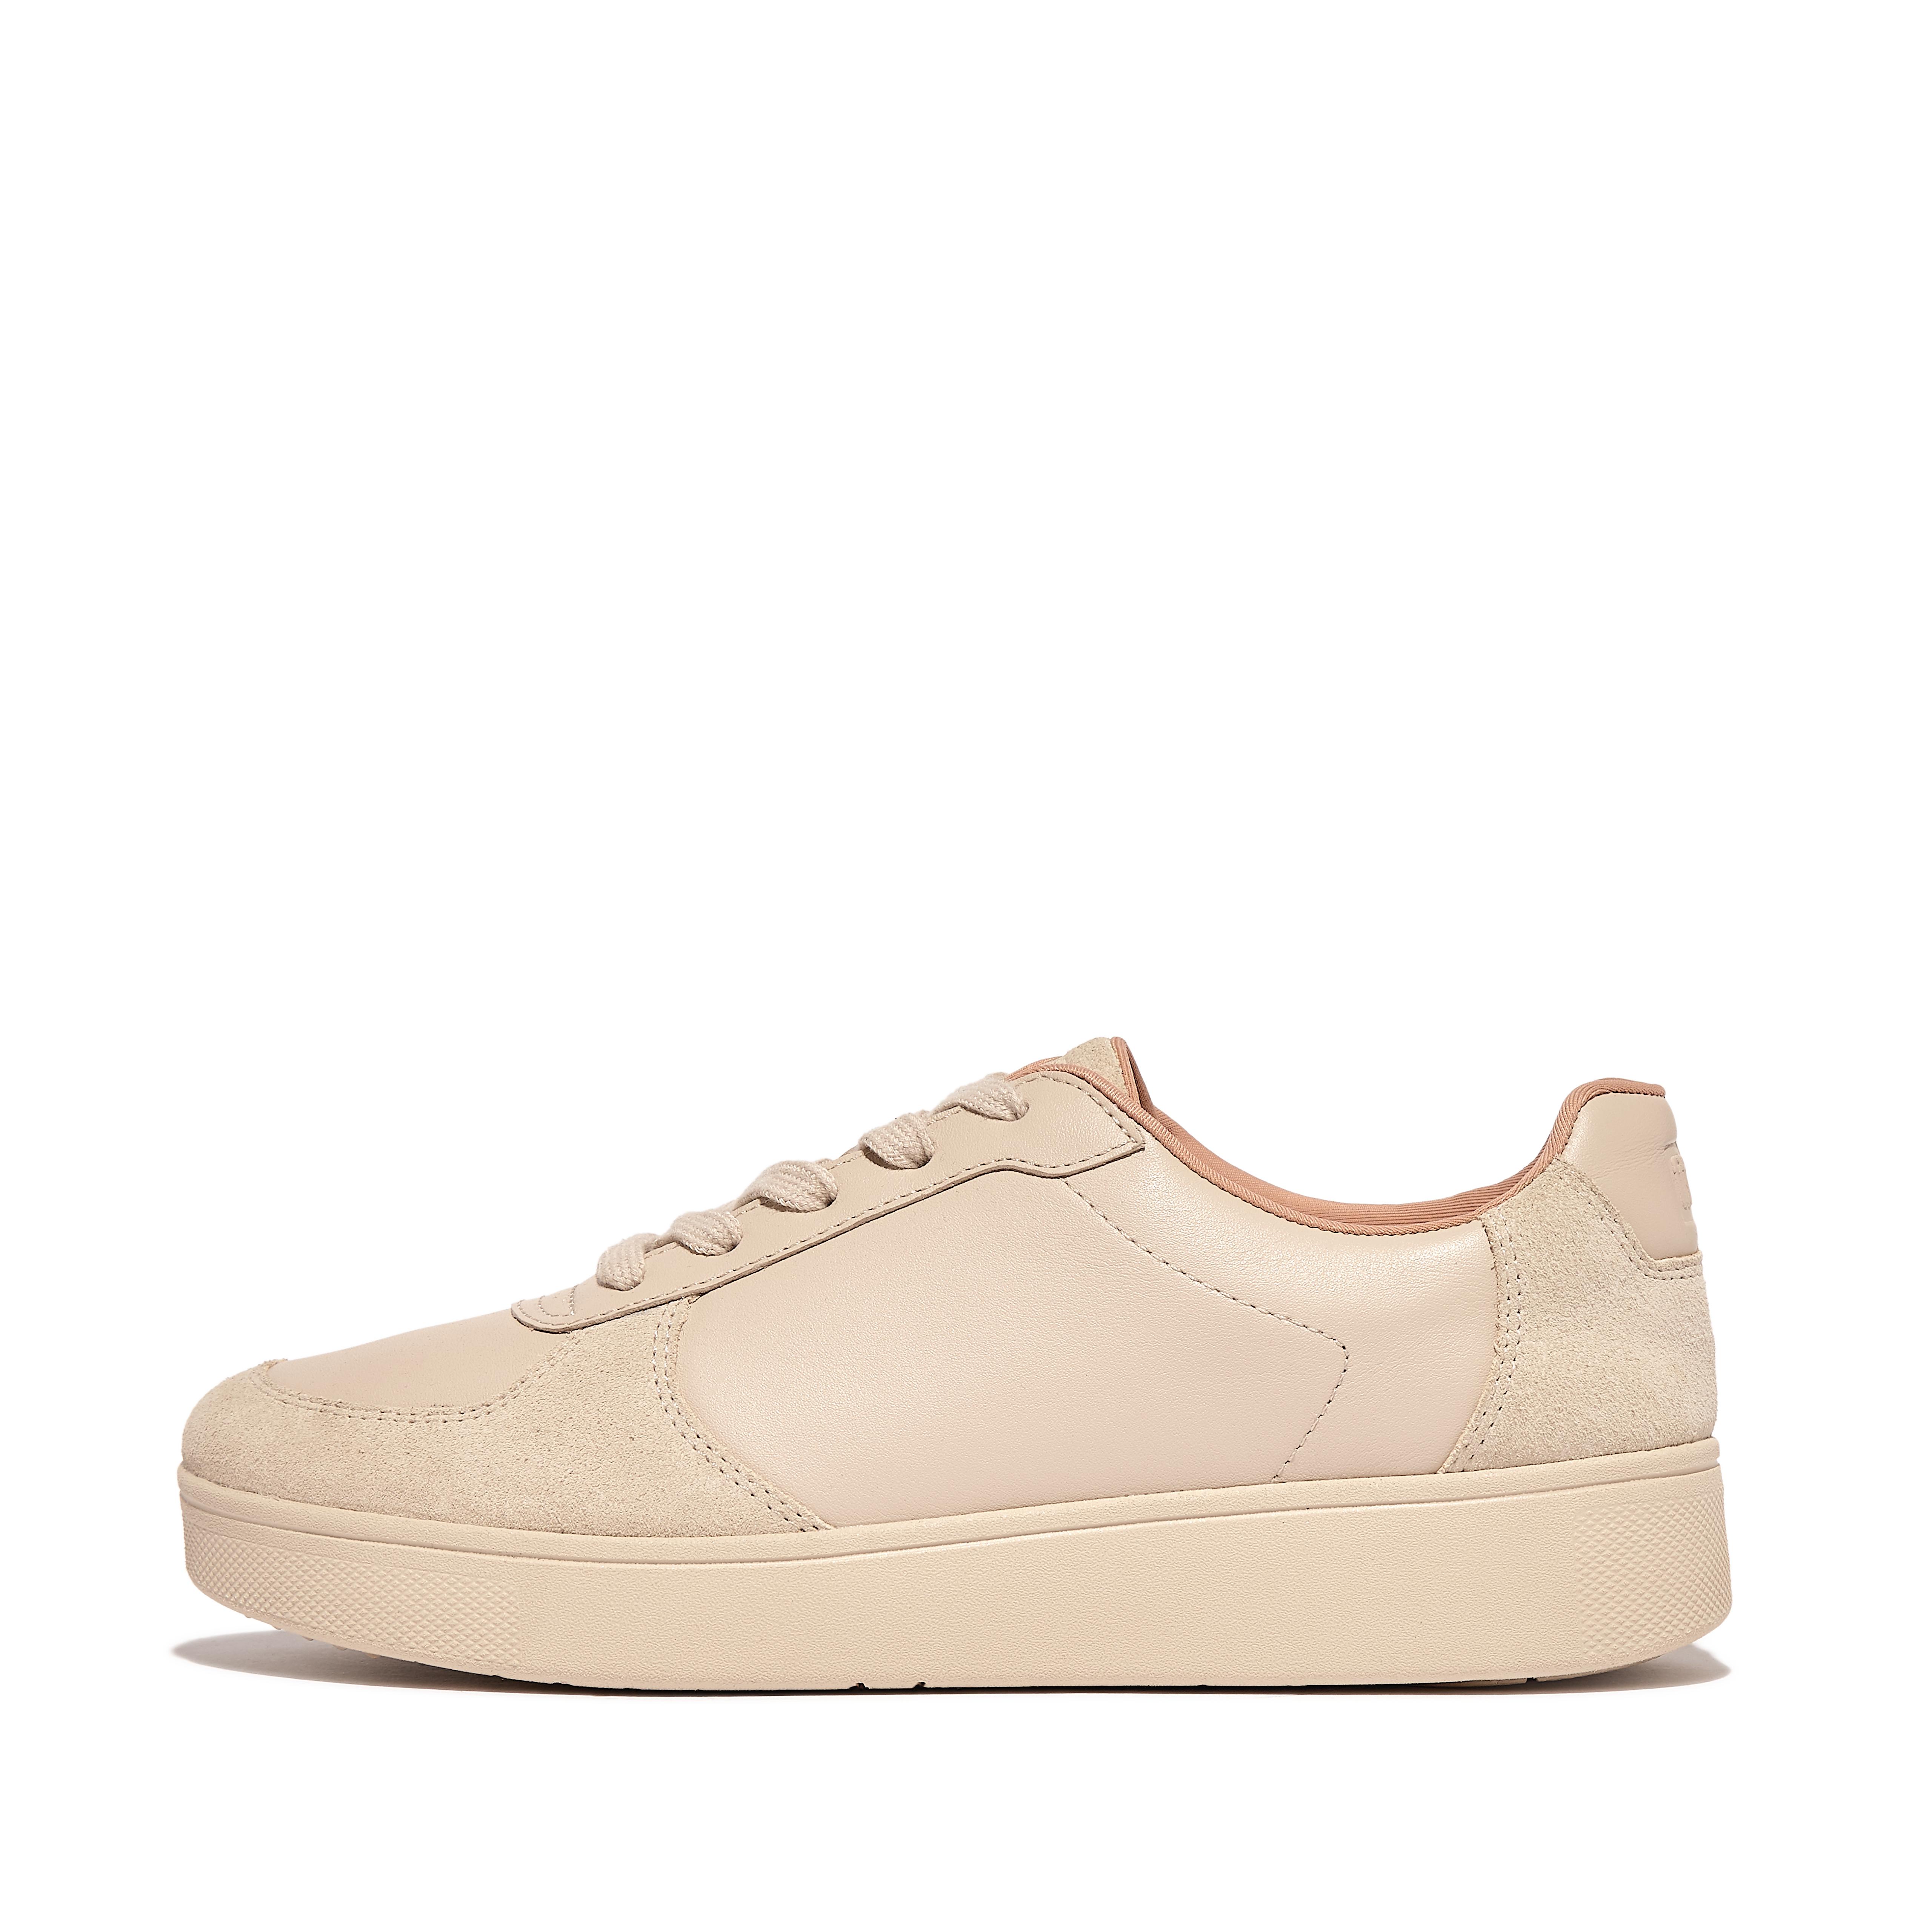 Fitflop Leather/Suede Panel Sneakers,Stone Beige